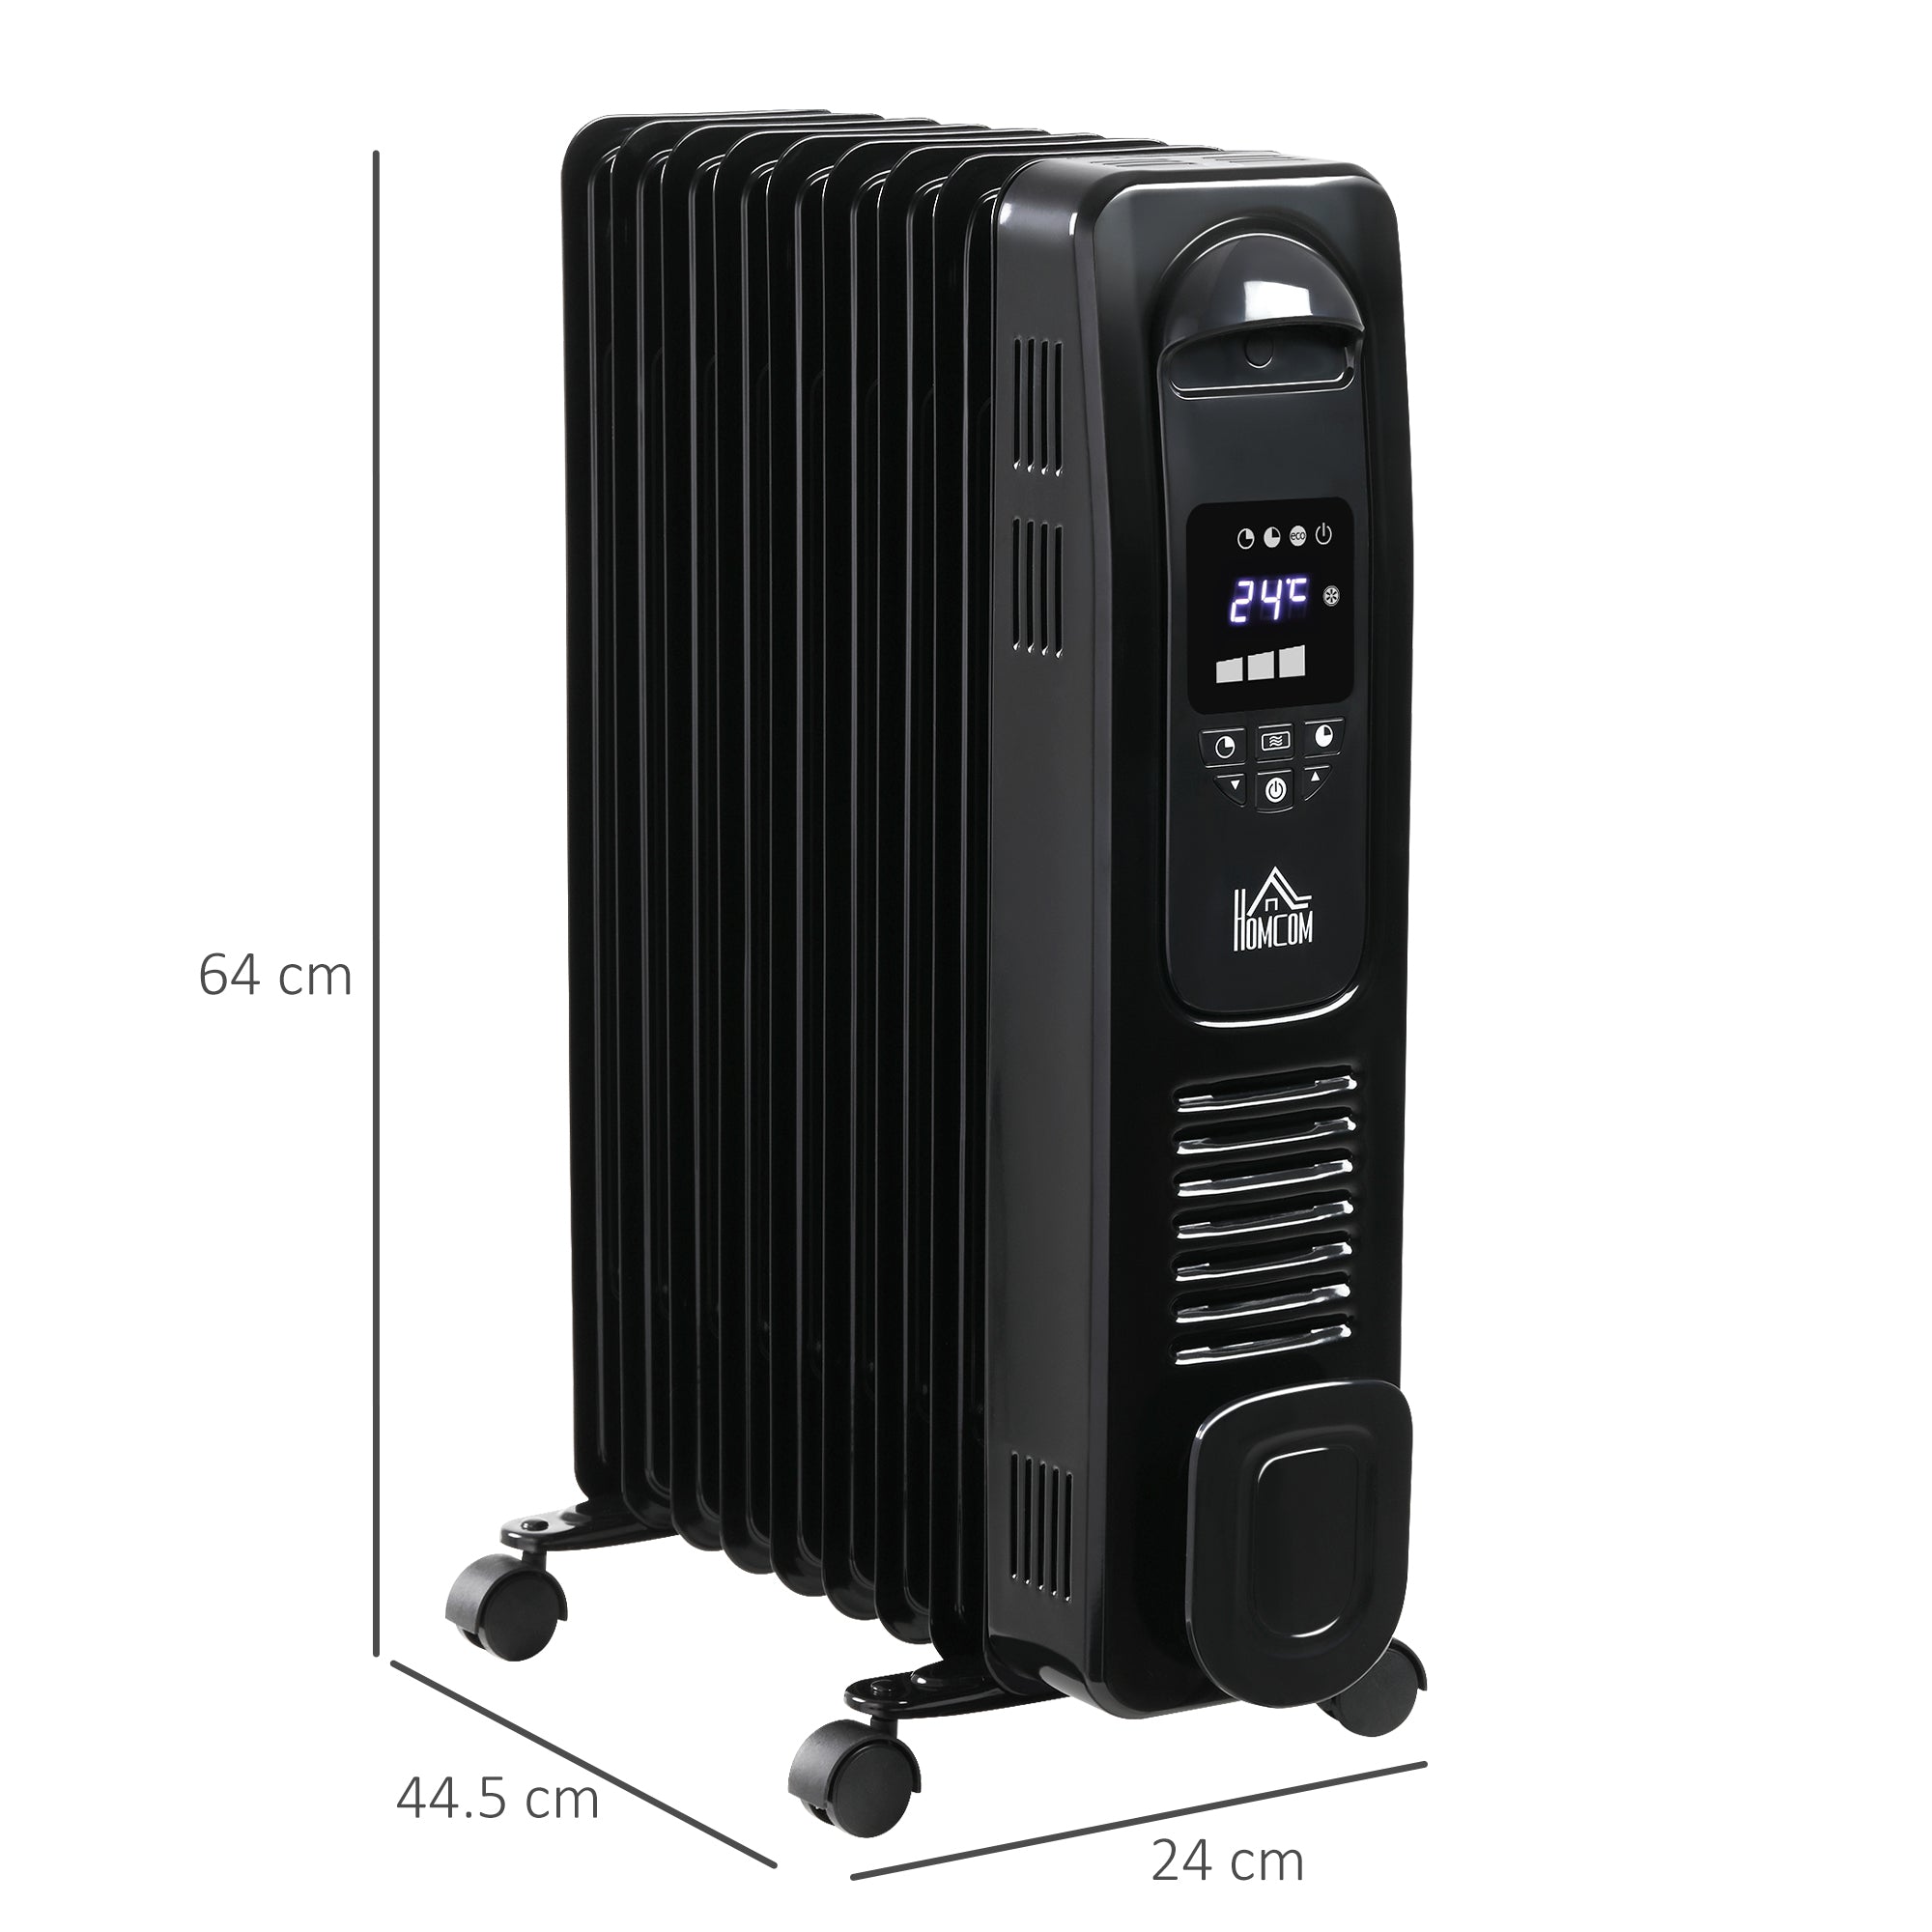 HOMCOM 2180W Digital Oil Filled Radiator, 9 Fin, Portable Electric Heater with LED Display, Timer 3 Heat Settings Safety Cut-Off Remote Control Black - Inspirely